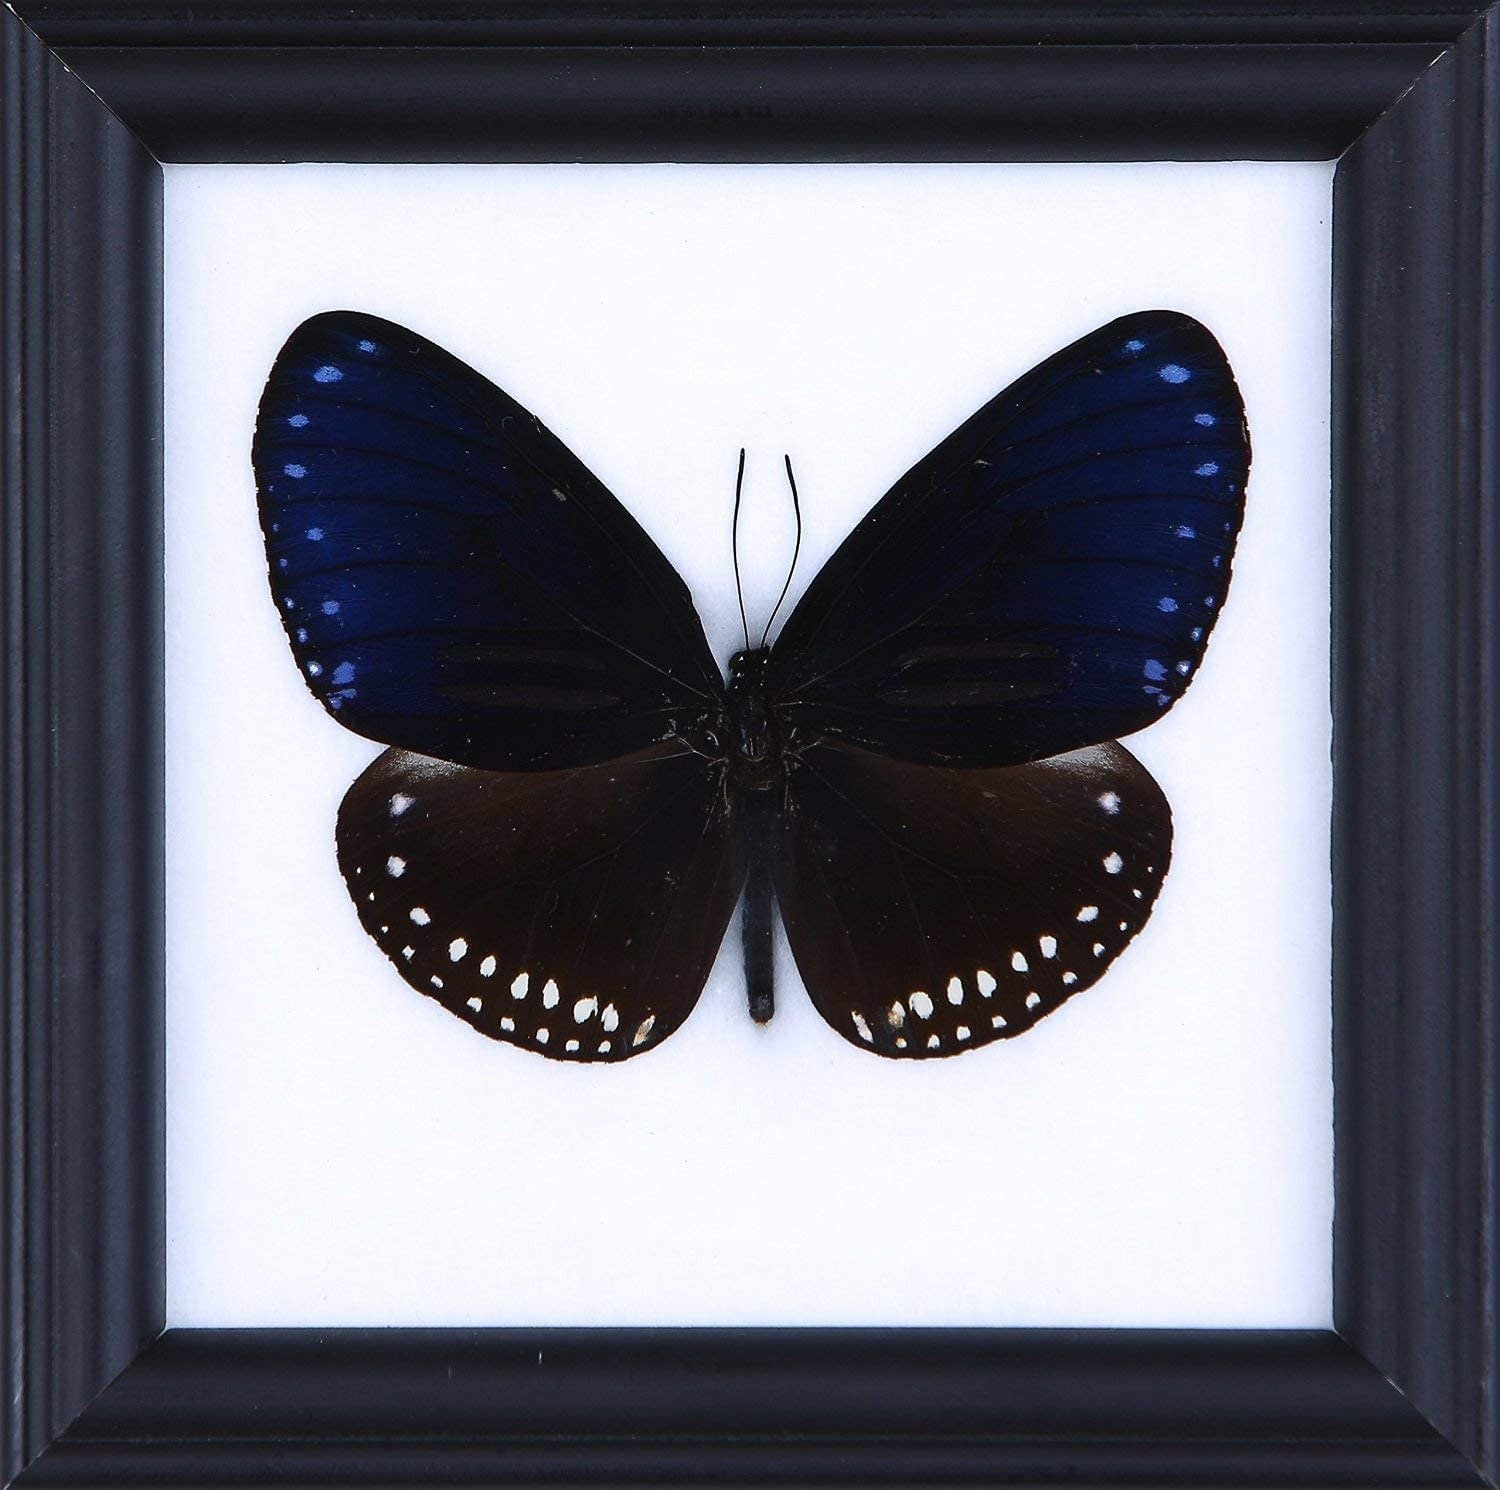 The Striped Blue Crow | Real Butterfly Mounted Under Glass, Wall Hanging Home Décor Framed 5 x 5 In. Gift Boxed